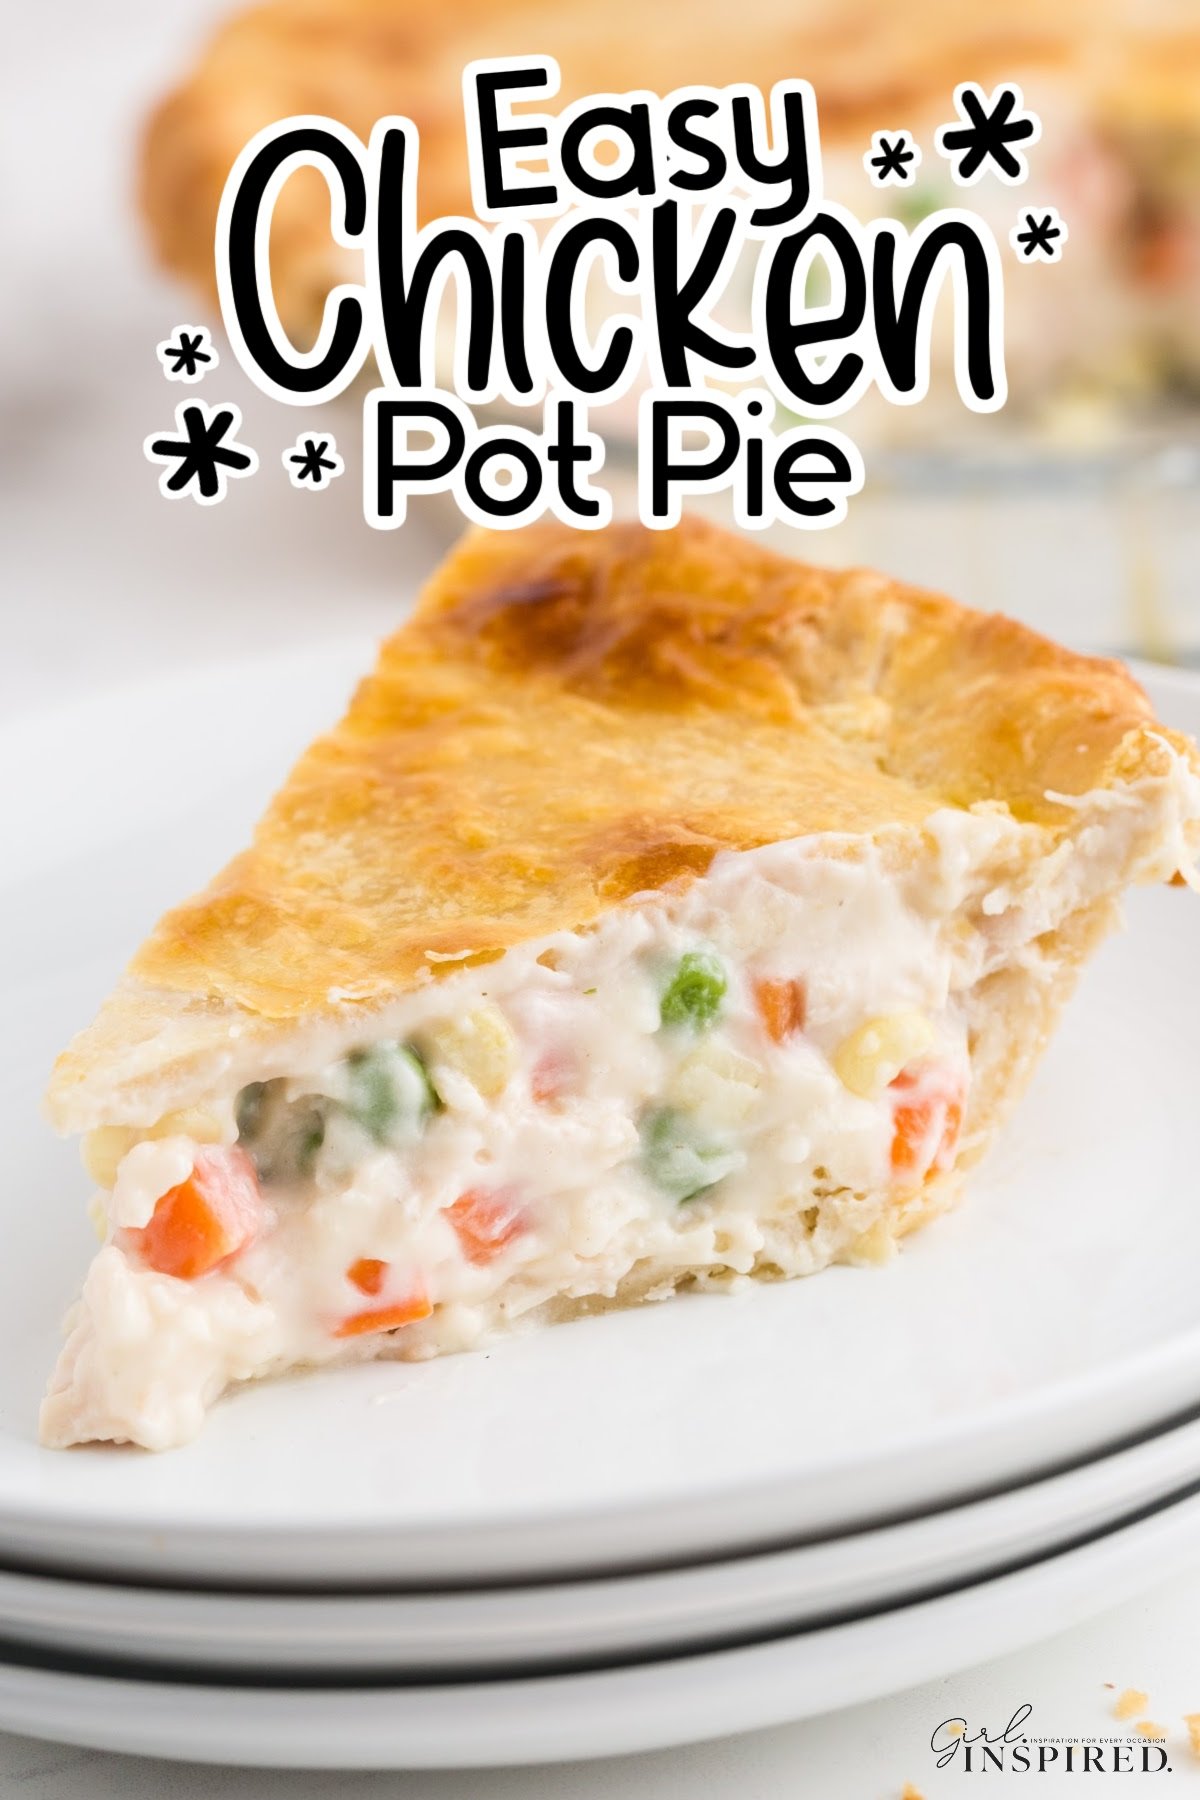 A serving of creamy chicken pot pie on plates with text overlay.